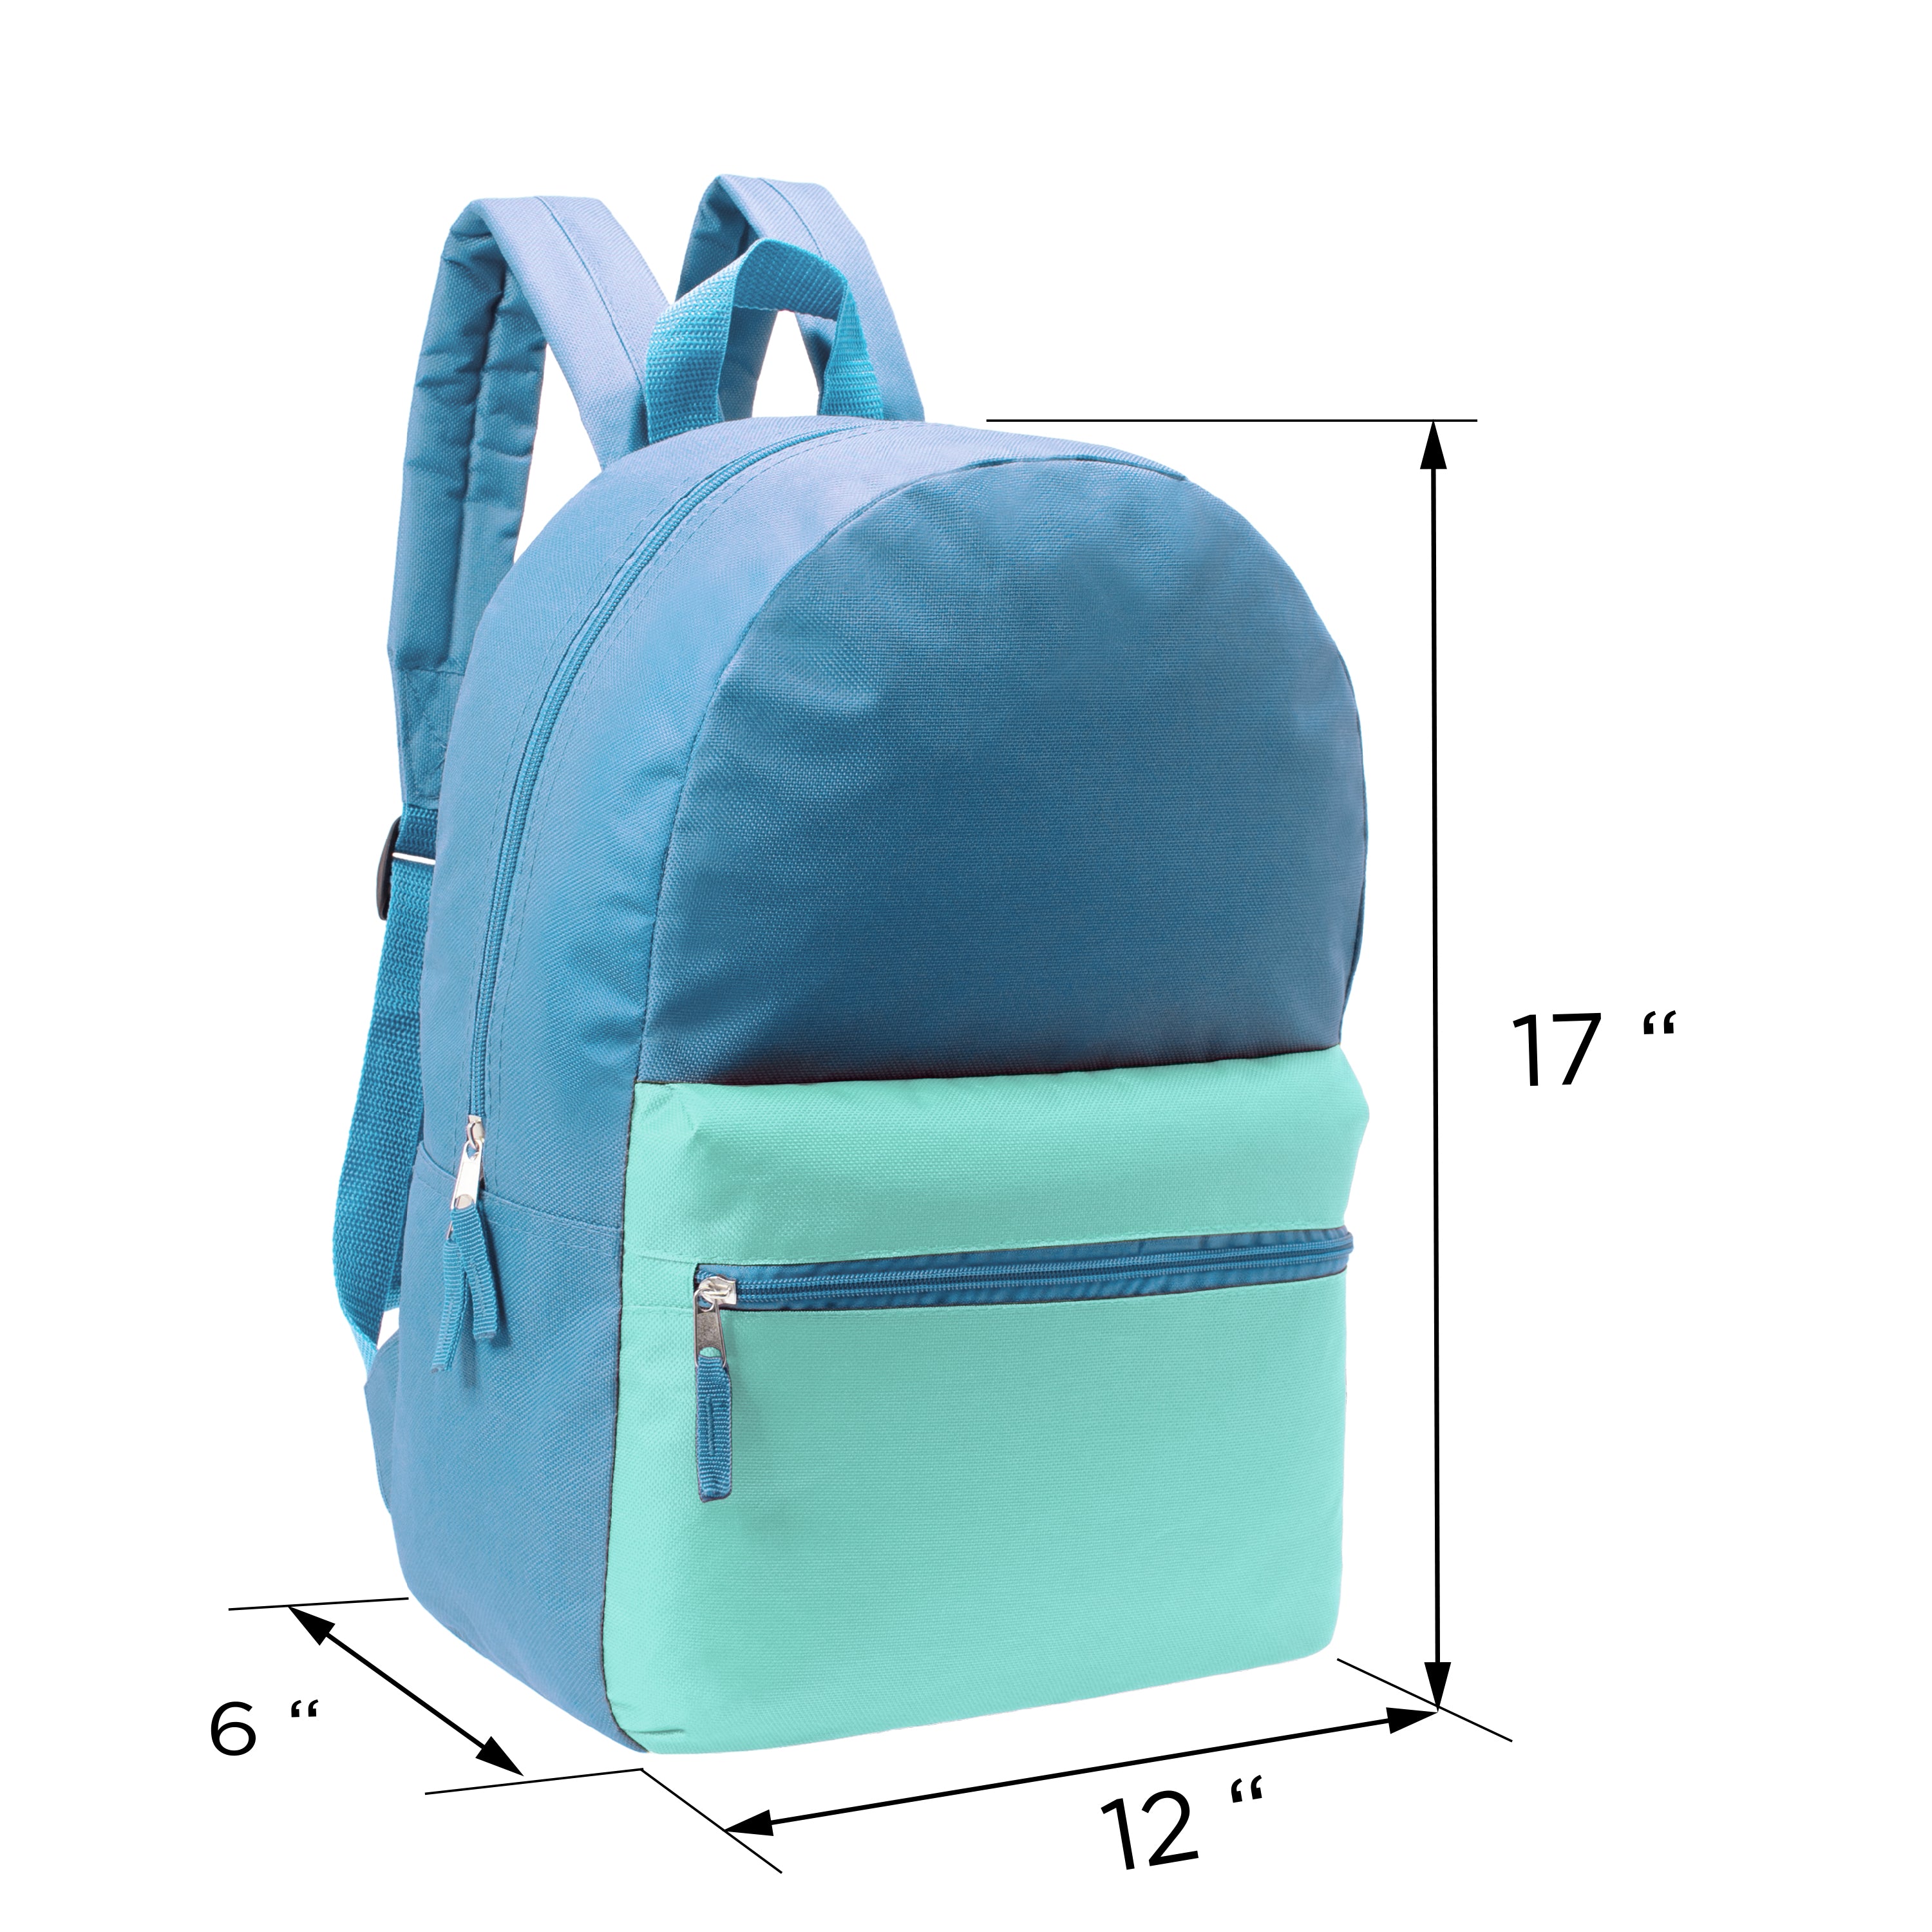 17" Girls Basic Wholesale Backpack in 6 Two Tone Color Combinations - Bulk Case of 24 Backpacks